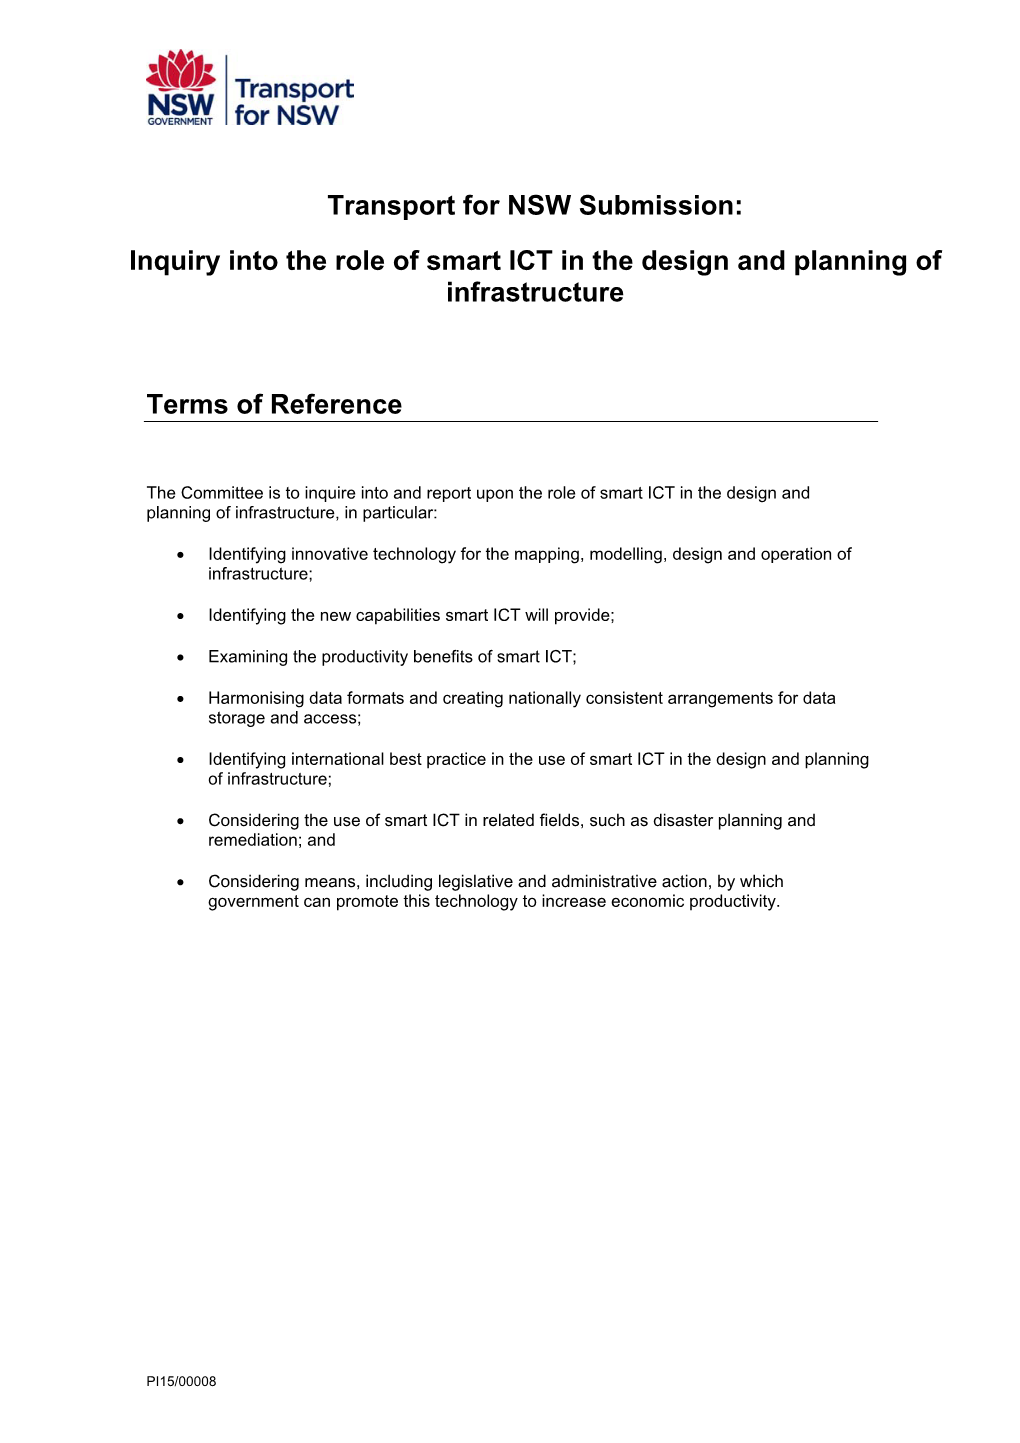 Transport for NSW Submission: Inquiry Into the Role of Smart ICT In